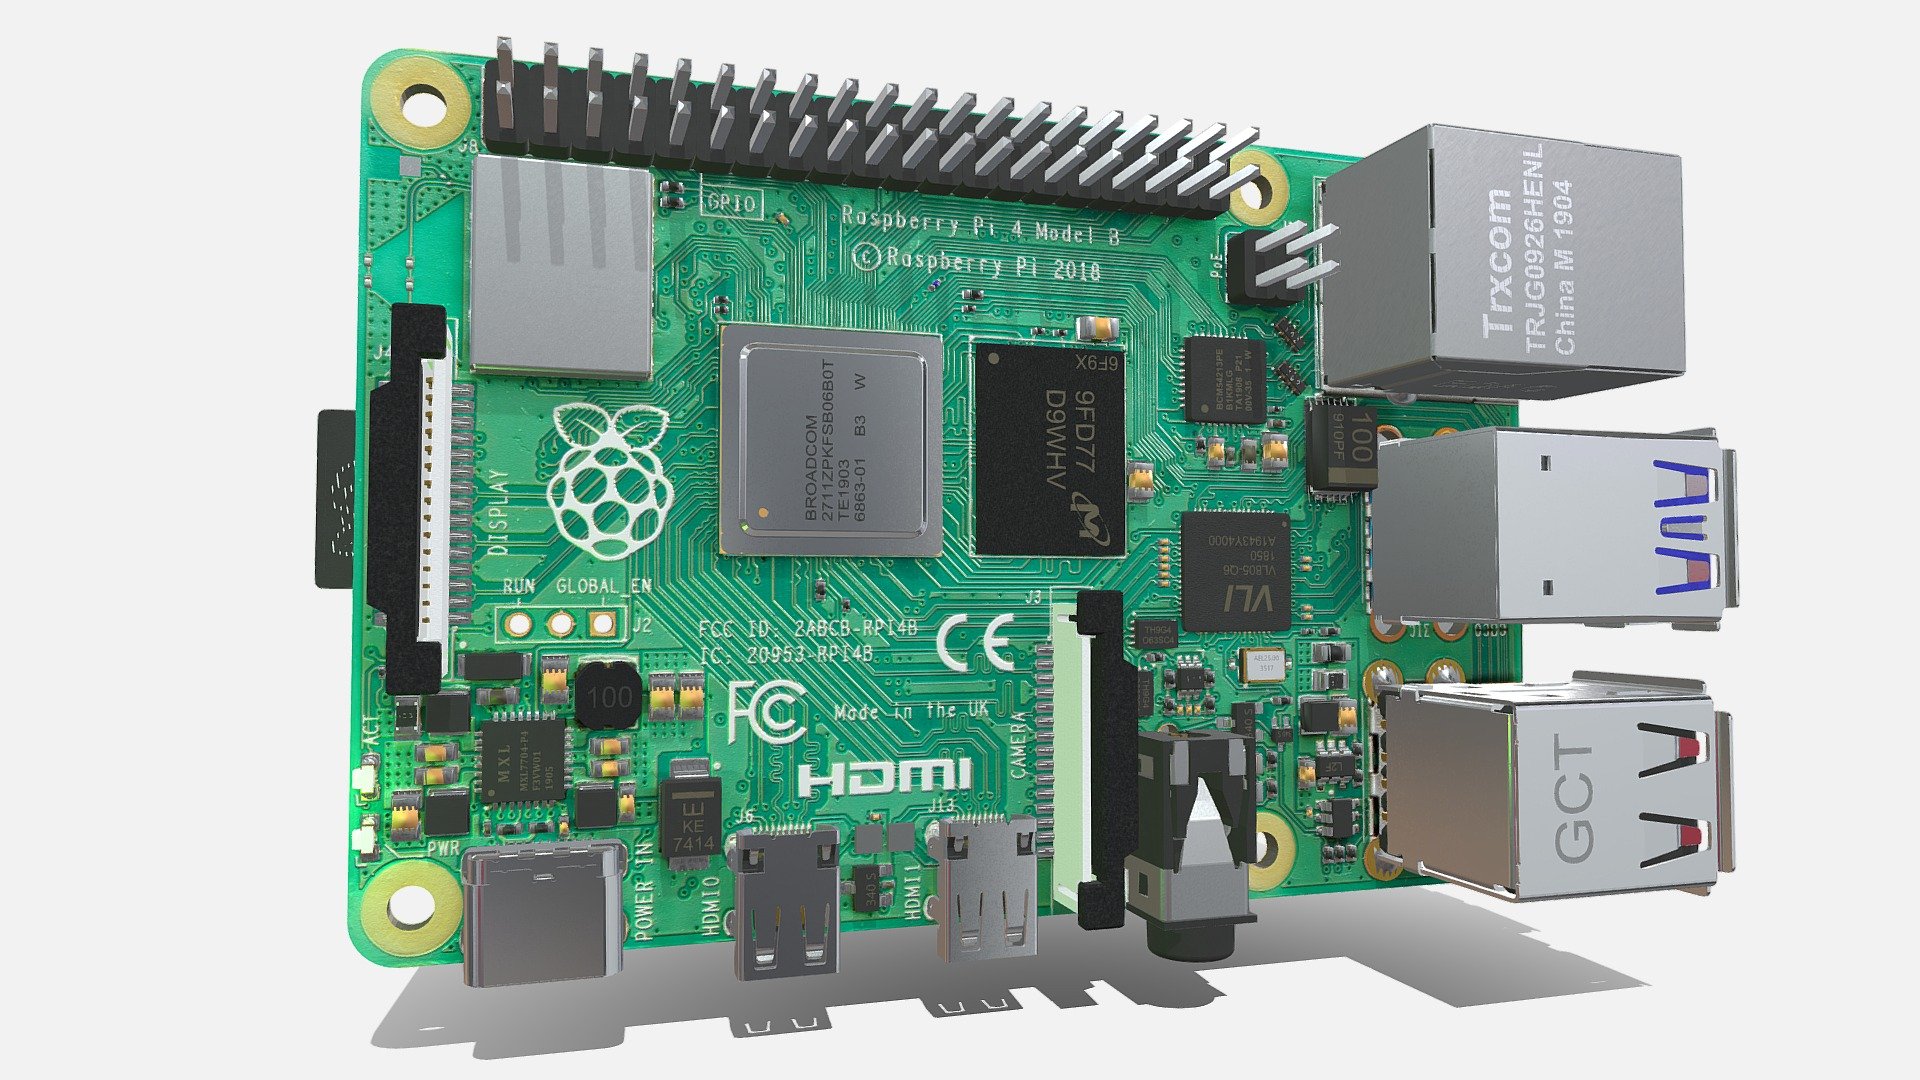 New version of a HIGH POLY 3D Model of the new RaspBerry Pi 4 Model B. 
Description is visible here : https://www.raspberrypi.org/products/raspberry-pi-4-model-b/

Model designed from the DXF file availble in the web site with blender tools v2.81. 
https://www.raspberrypi.org/documentation/hardware/raspberrypi/mechanical/README.md

All components can be modified (translate, delete,…). Don’t hesitate to comment somes hardware references that you want to see in sketchfab.

A low cost version of the model is available here : 
https://sketchfab.com/3d-models/raspberry-pi-4-model-b-37d36f67edaa4048b90858aa0af347e8
 - Raspberry Pi 4 Model B (new version) - Buy Royalty Free 3D model by F2A (@Fa_Sketch) 3d model